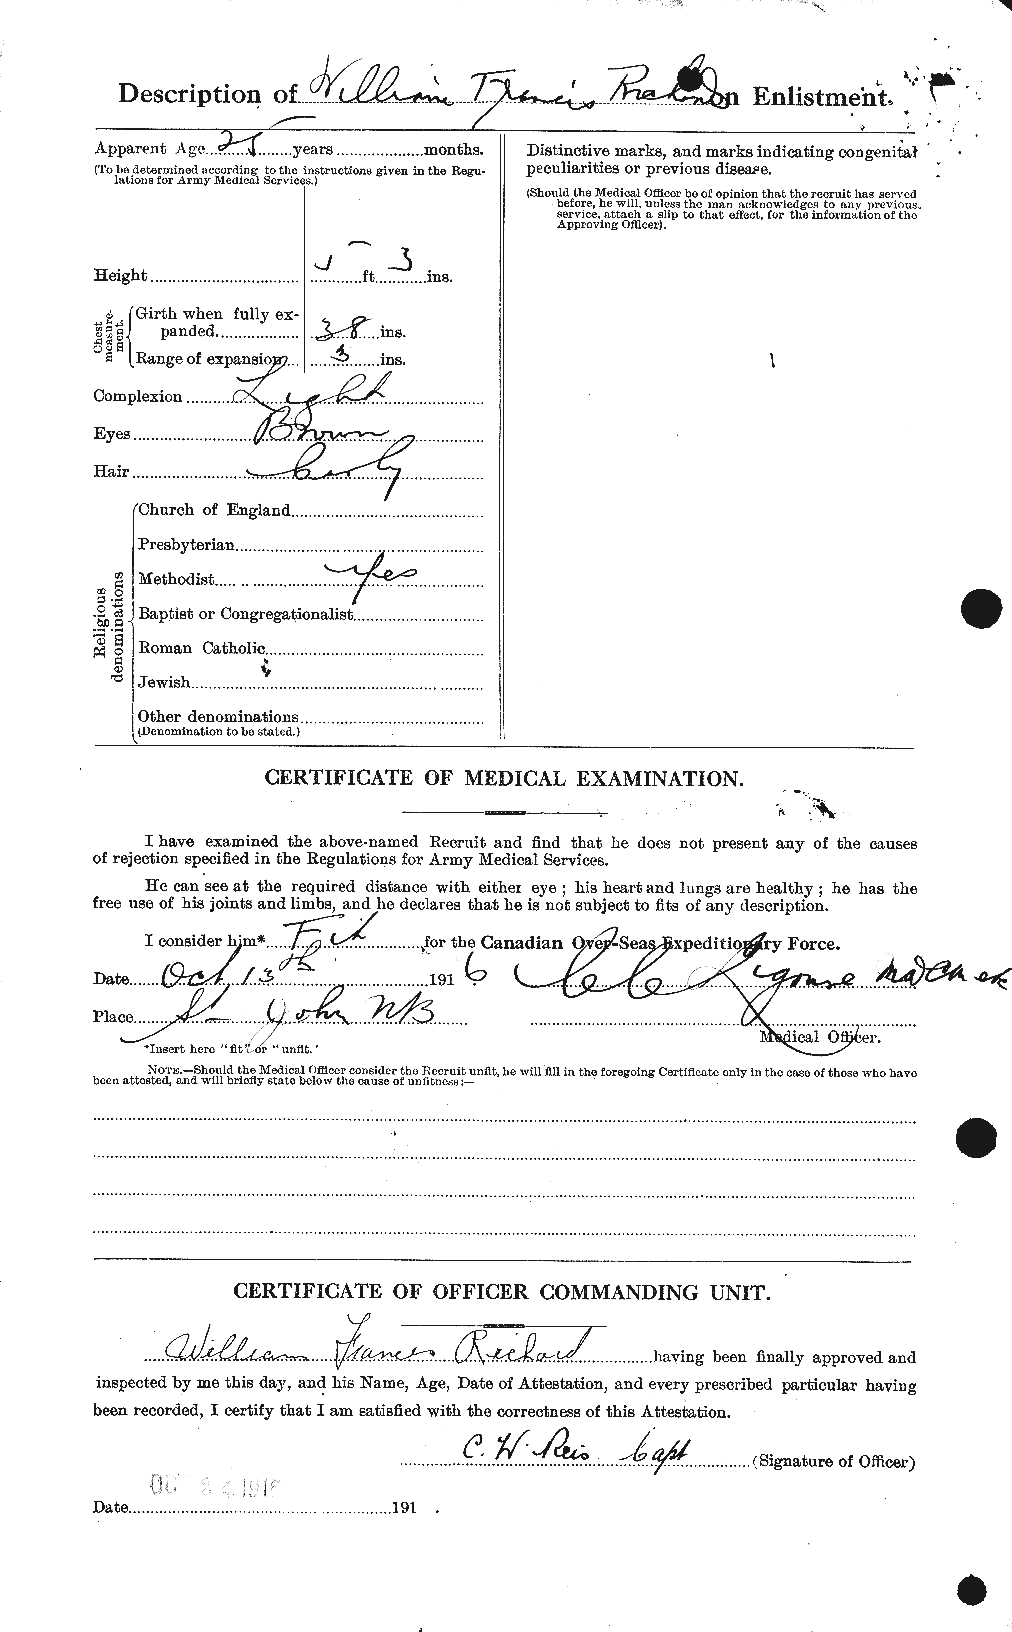 Personnel Records of the First World War - CEF 603437b